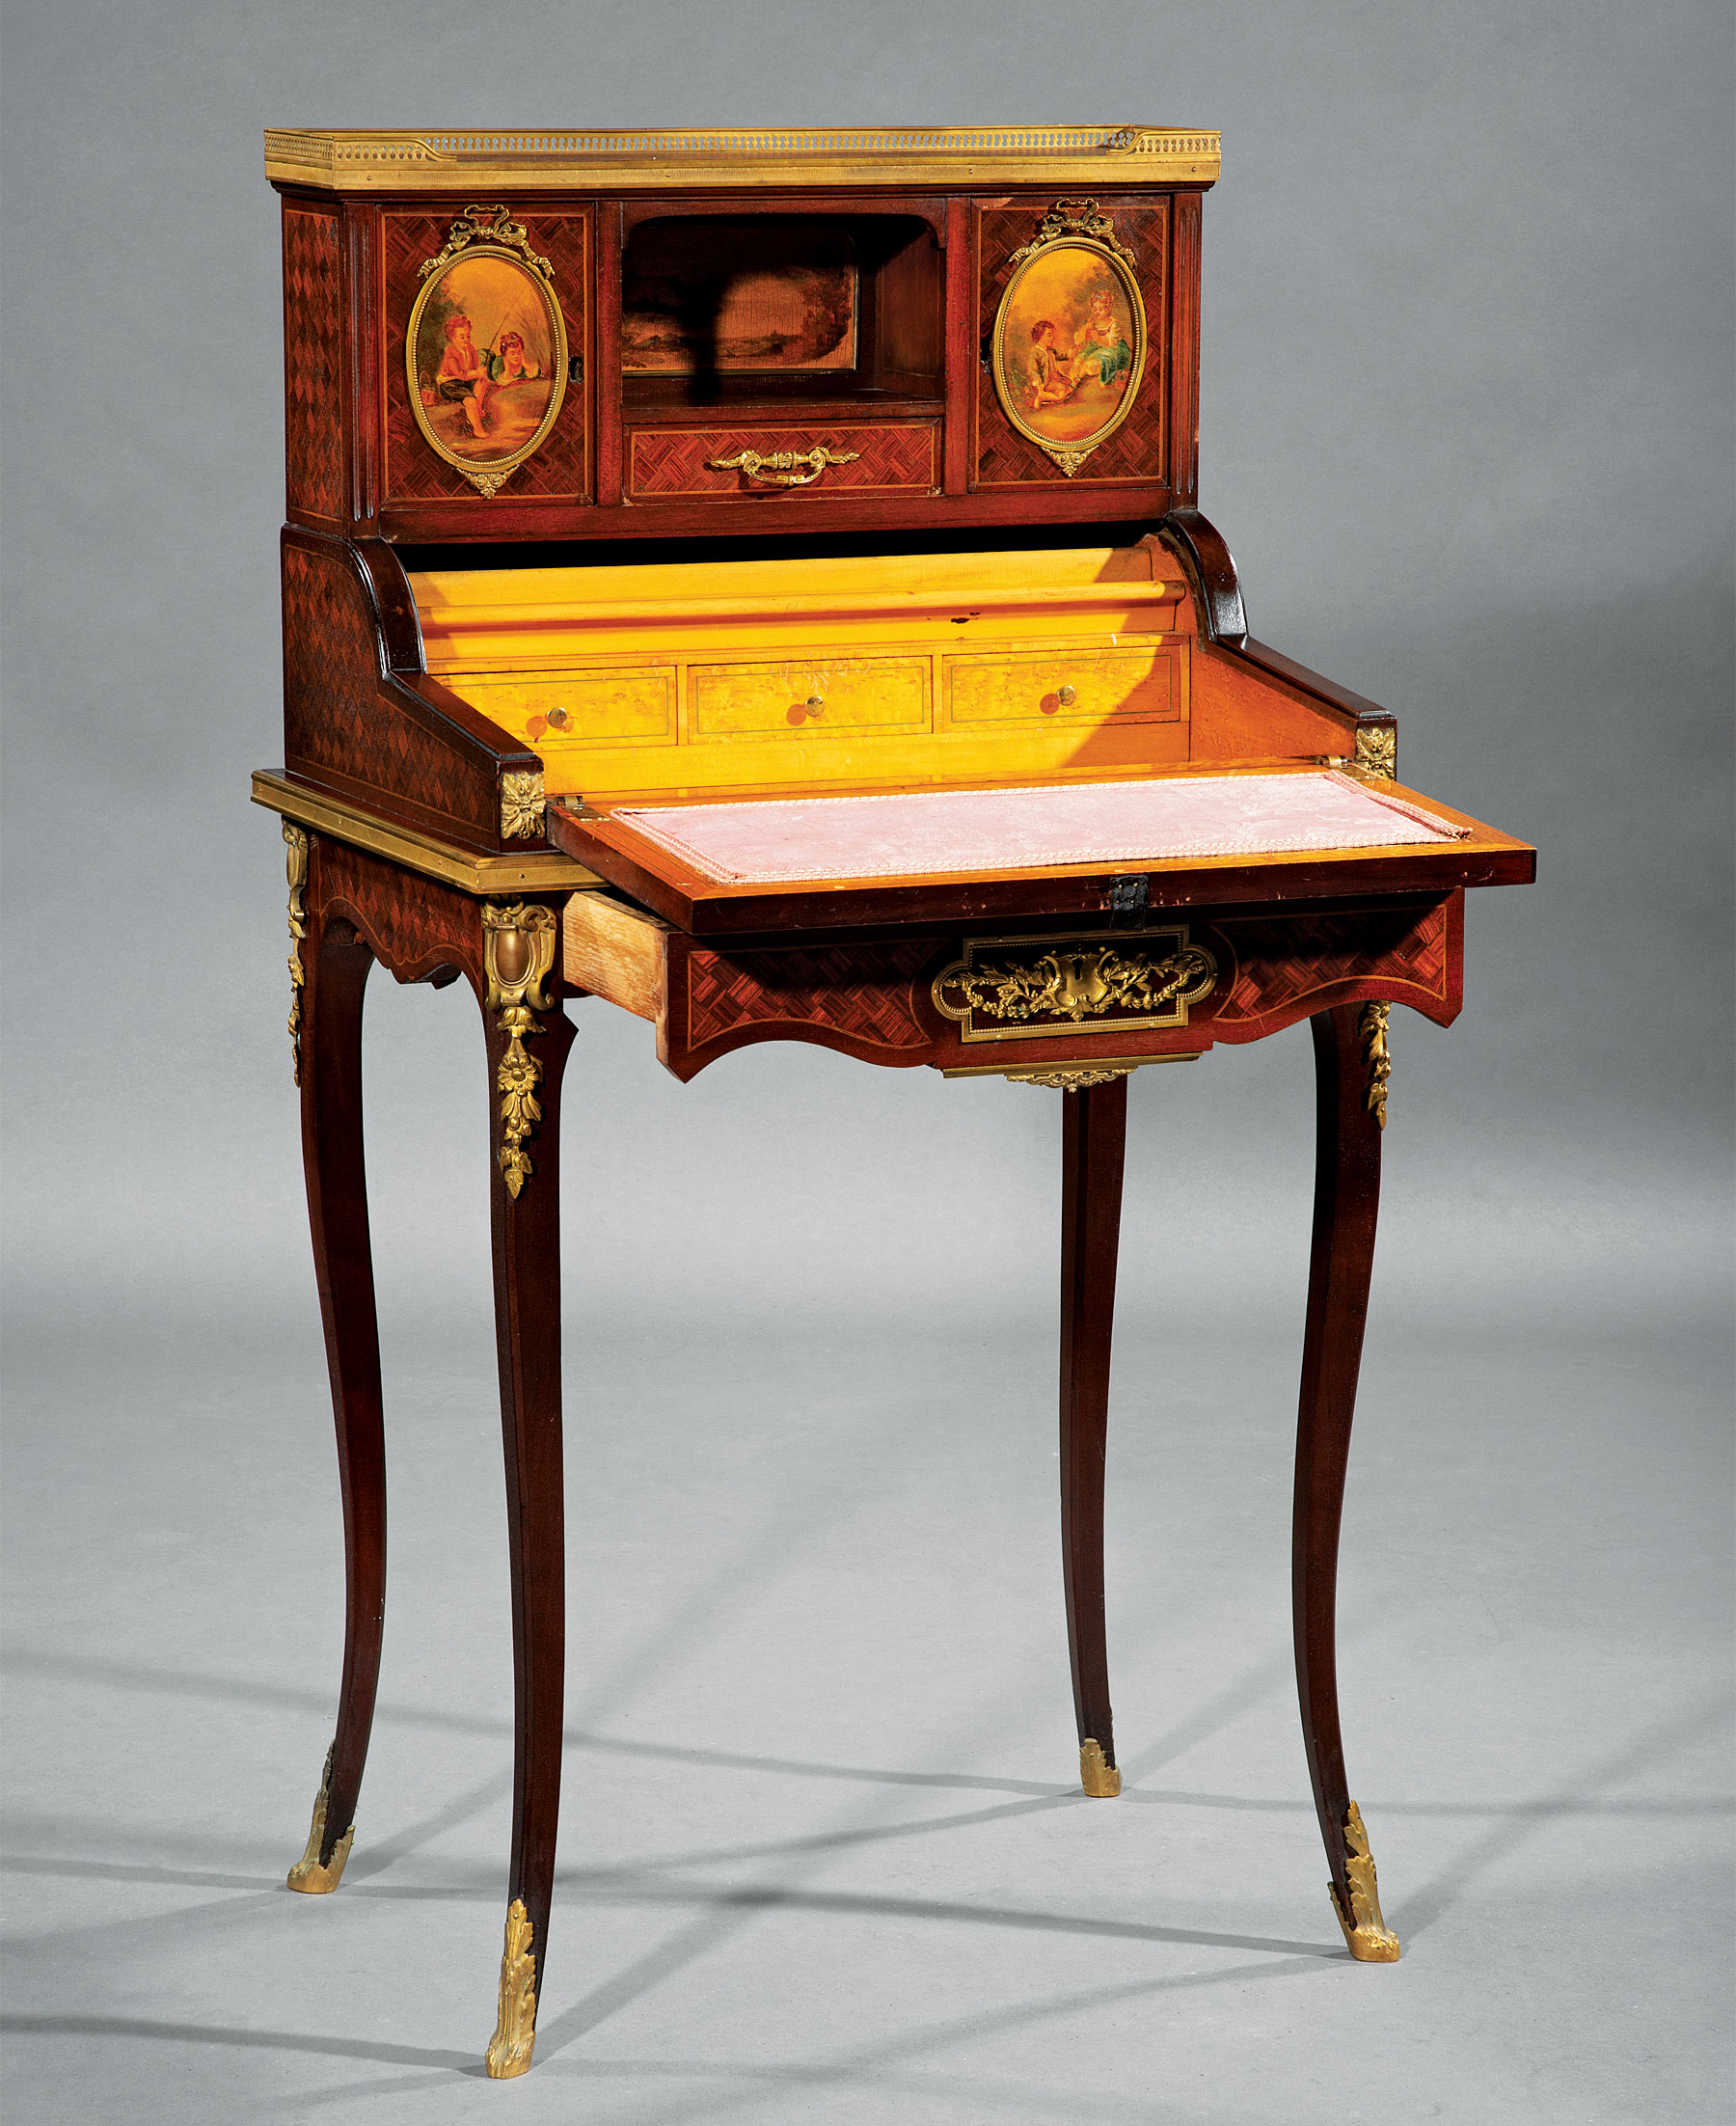 Louis XVI-Style Bronze-Mounted, Painted, Parquetry and Marquetry Escritoire , galleried fitted - Image 2 of 3